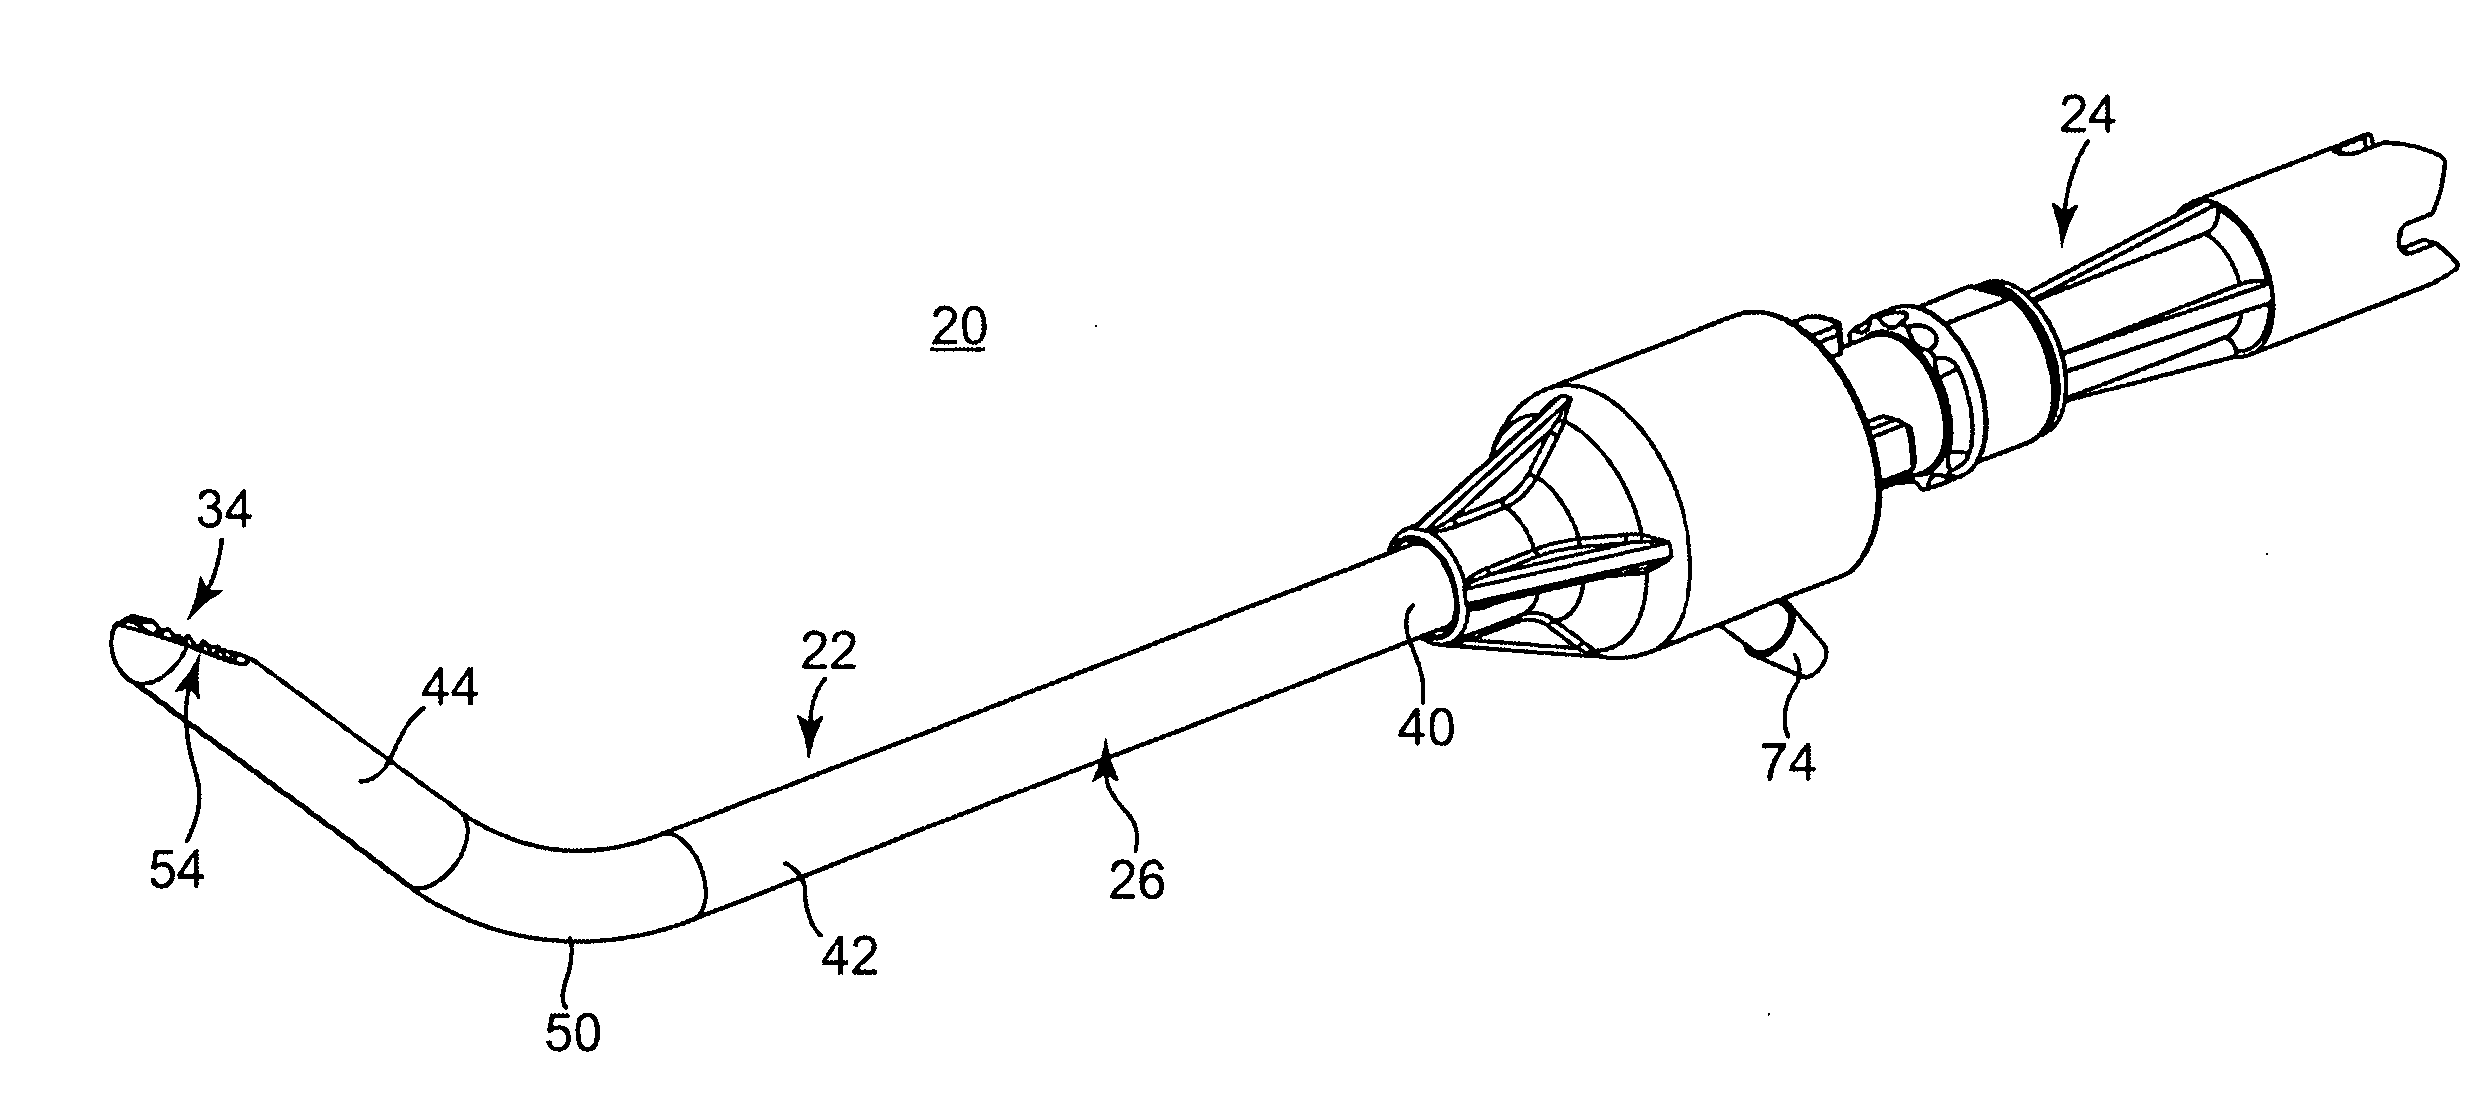 Method and apparatus for removing material from an intervertebral disc space, such as in performing a nucleotomy